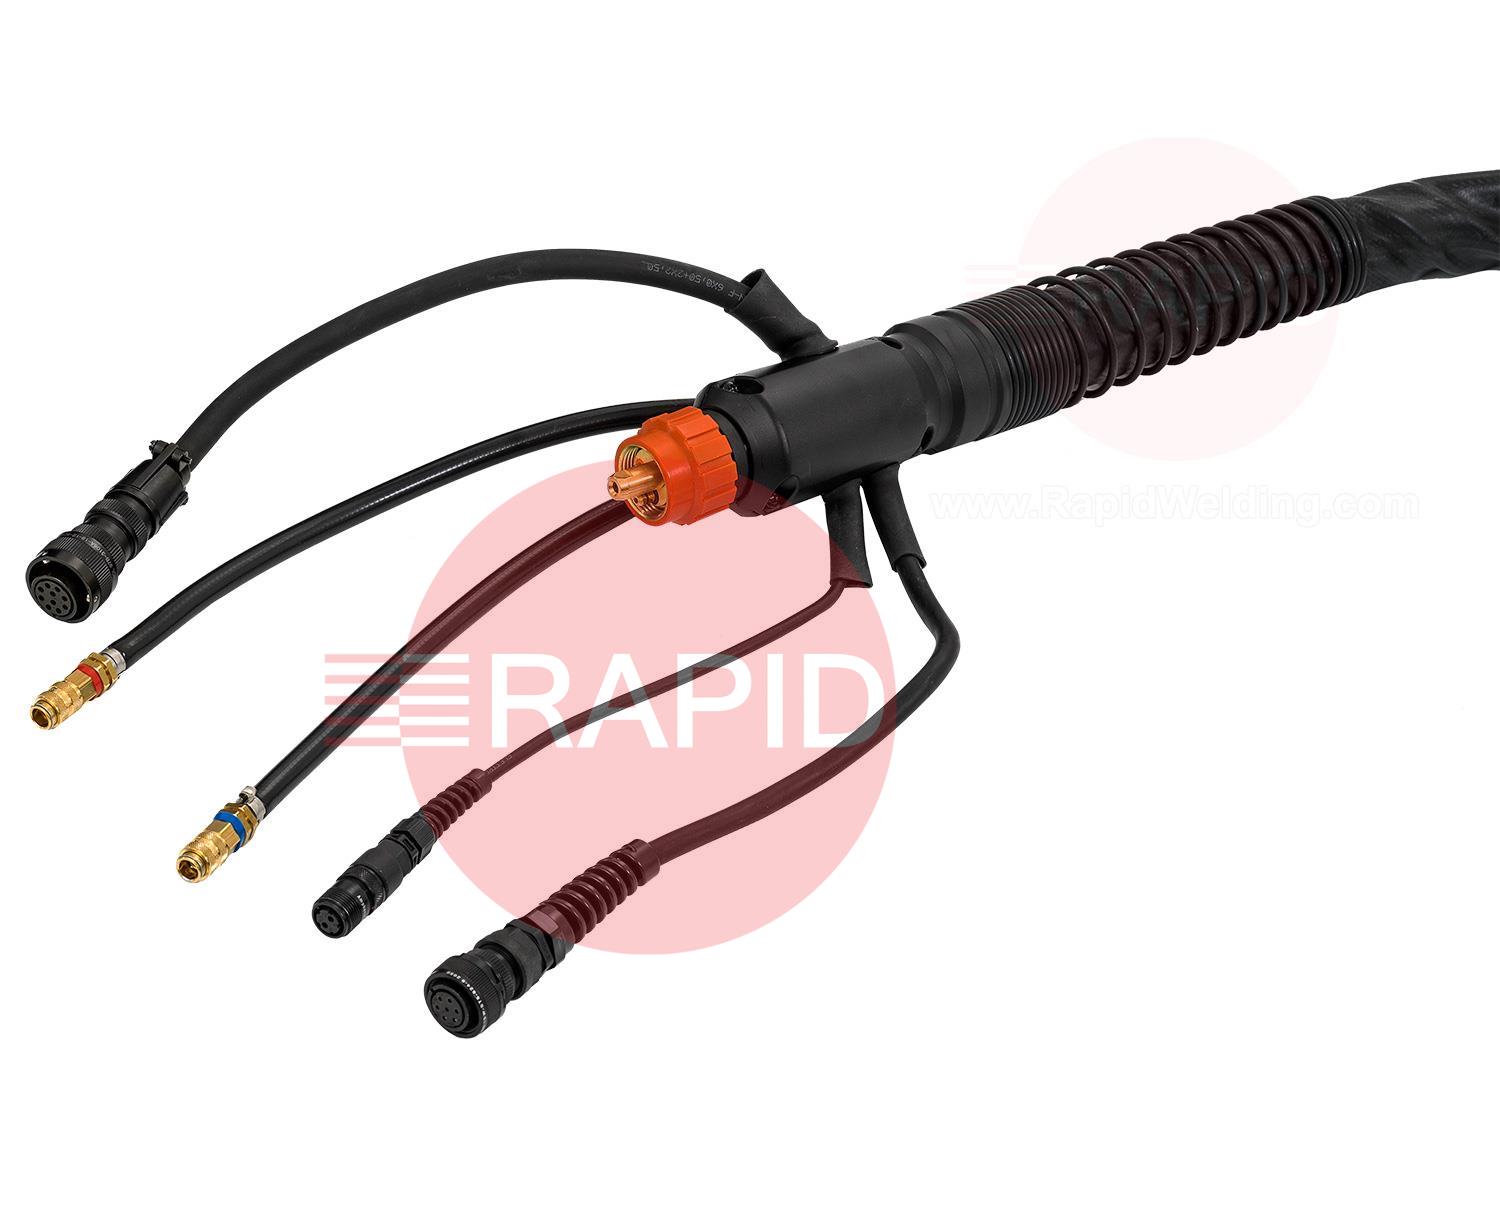 SGTXW155CBL  Kemppi Supersnake GTX Water Cooled Interconnection Cable (Std Liner FE 1.0-1.6mm) - 15m / 50mm2